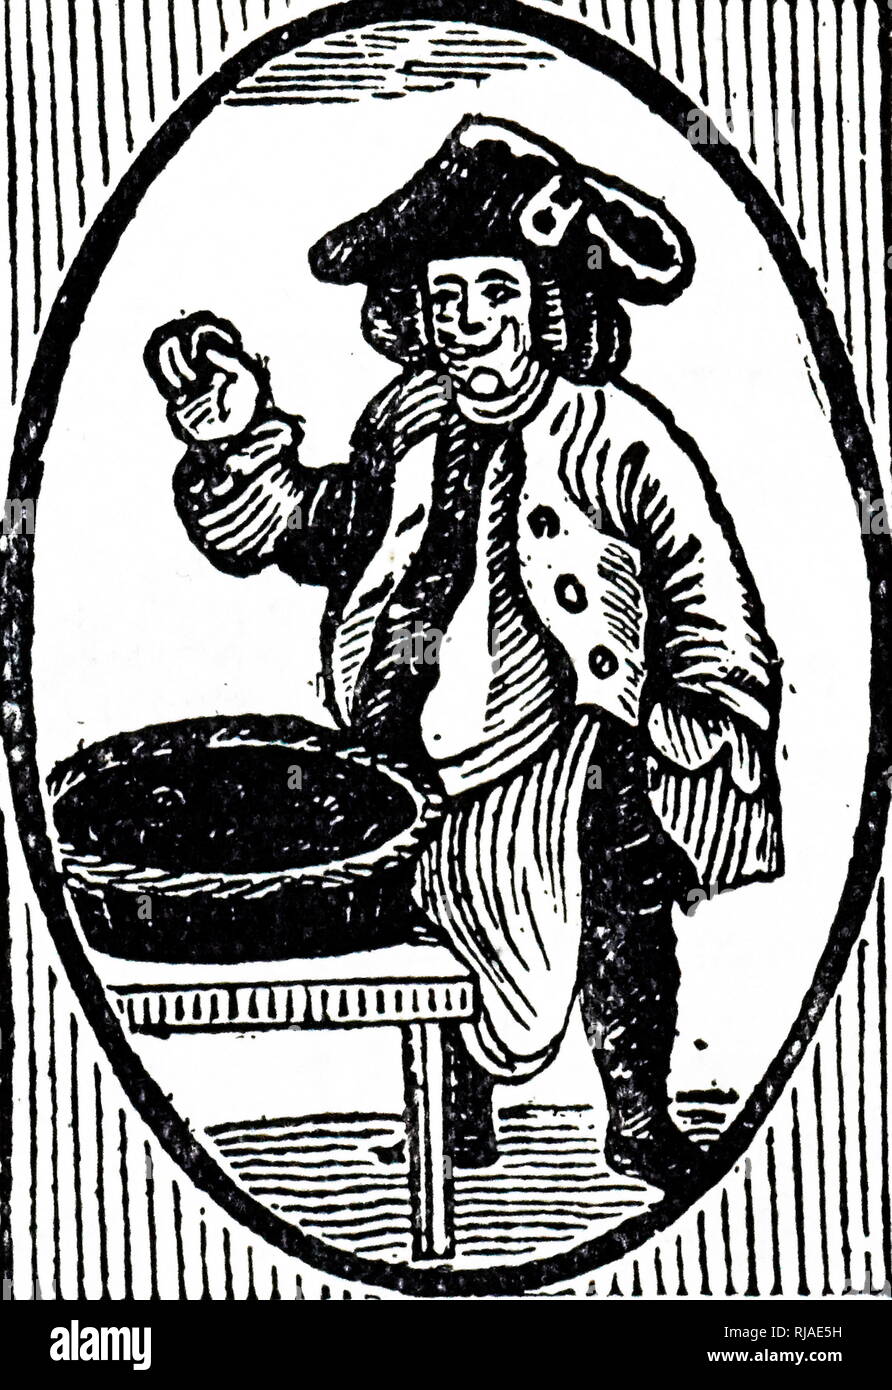 18th century illustration showing a Hot Spice Gingerbread seller; London 1800 Stock Photo